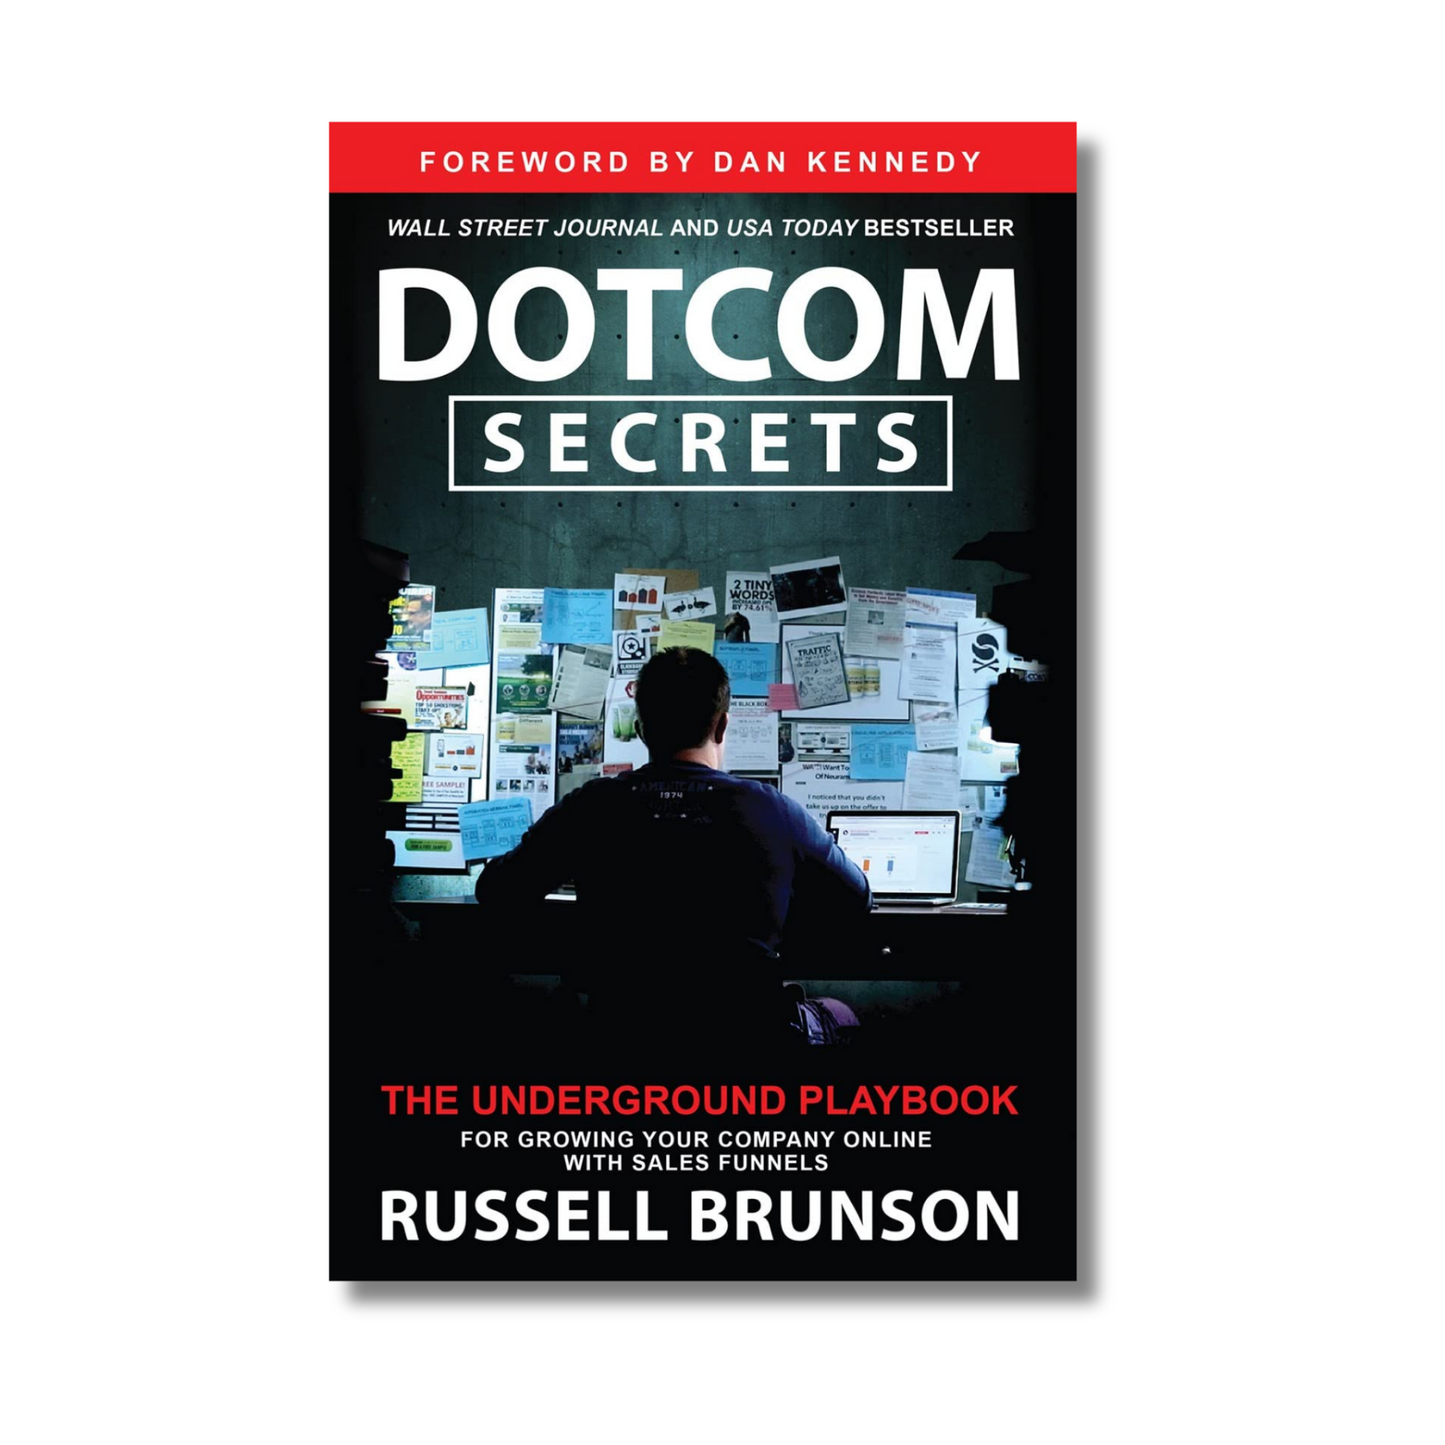 Dotcom Secrets: The Underground Playbook for Growing Your Company Online with Sales Funnels (Paperback)